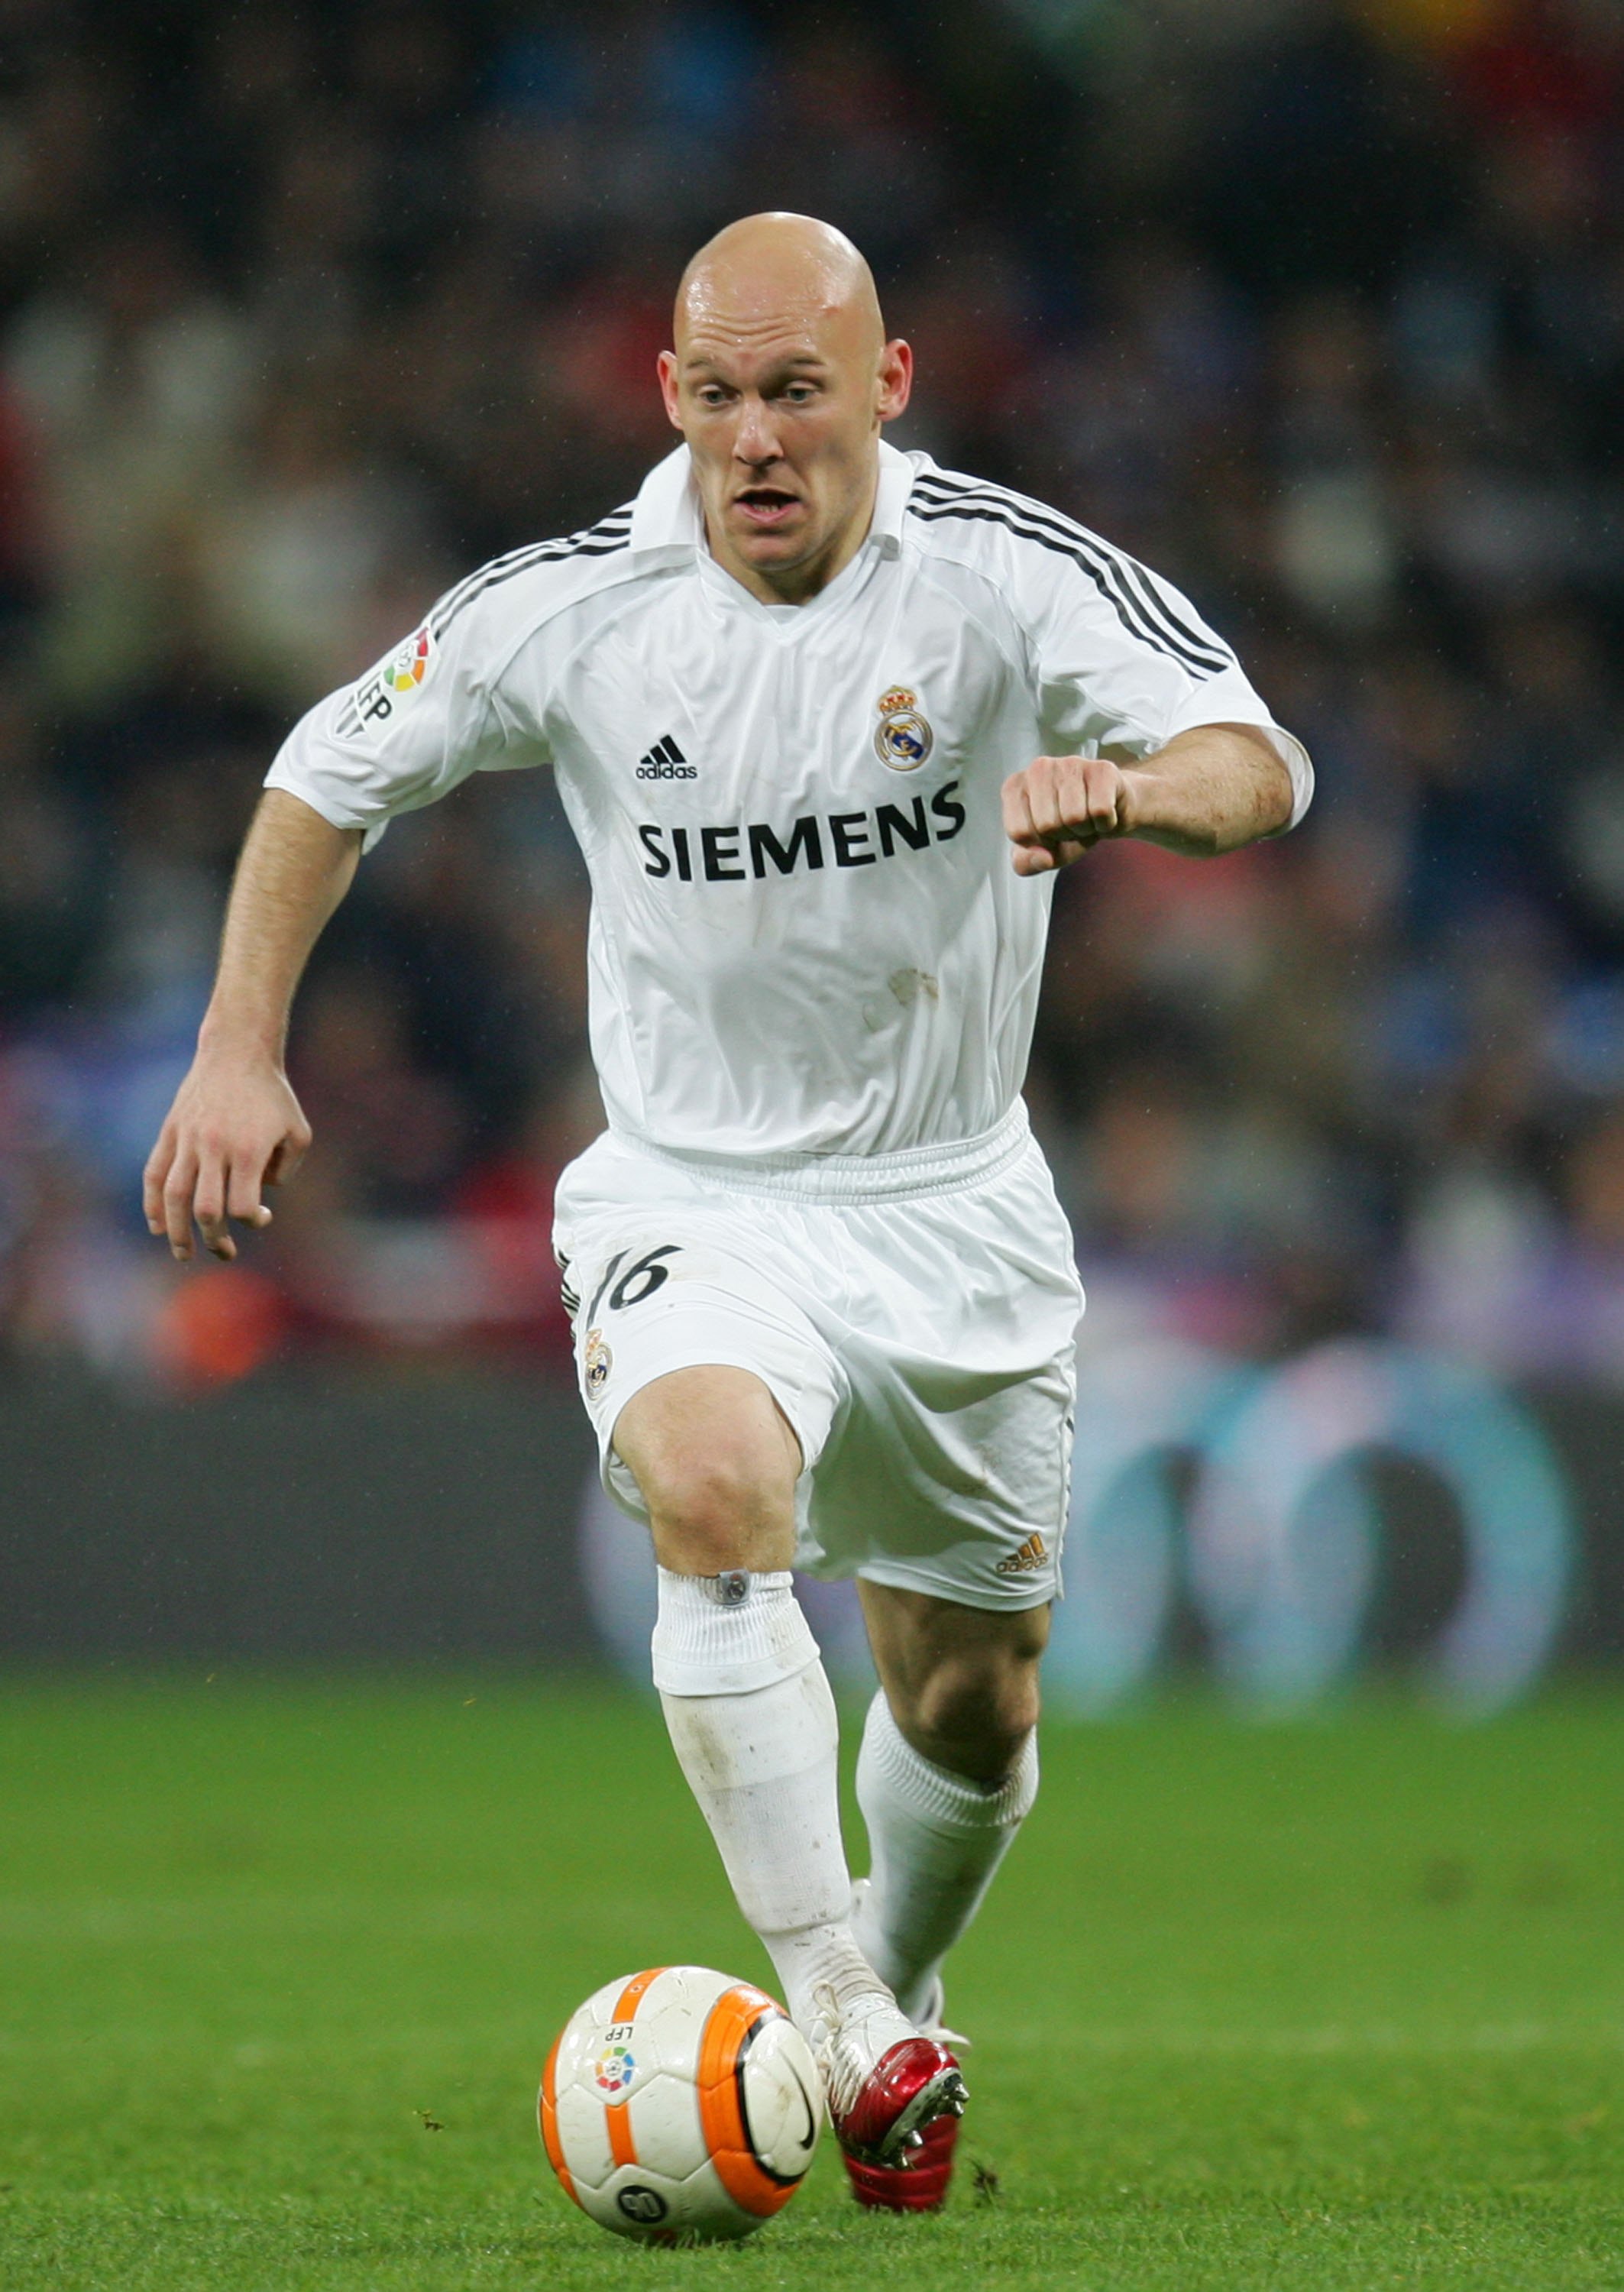 MADRID, SPAIN - MARCH 4: Thomas Gravesen of Real Madrid in action during a Primera Liga match between Real Madrid and Atletico Madrid at the Santiago Bernabeu stadium on March 4, 2006 in Madrid, Spain. Real won 2-1. (Photo by Denis Doyle/Getty Images)